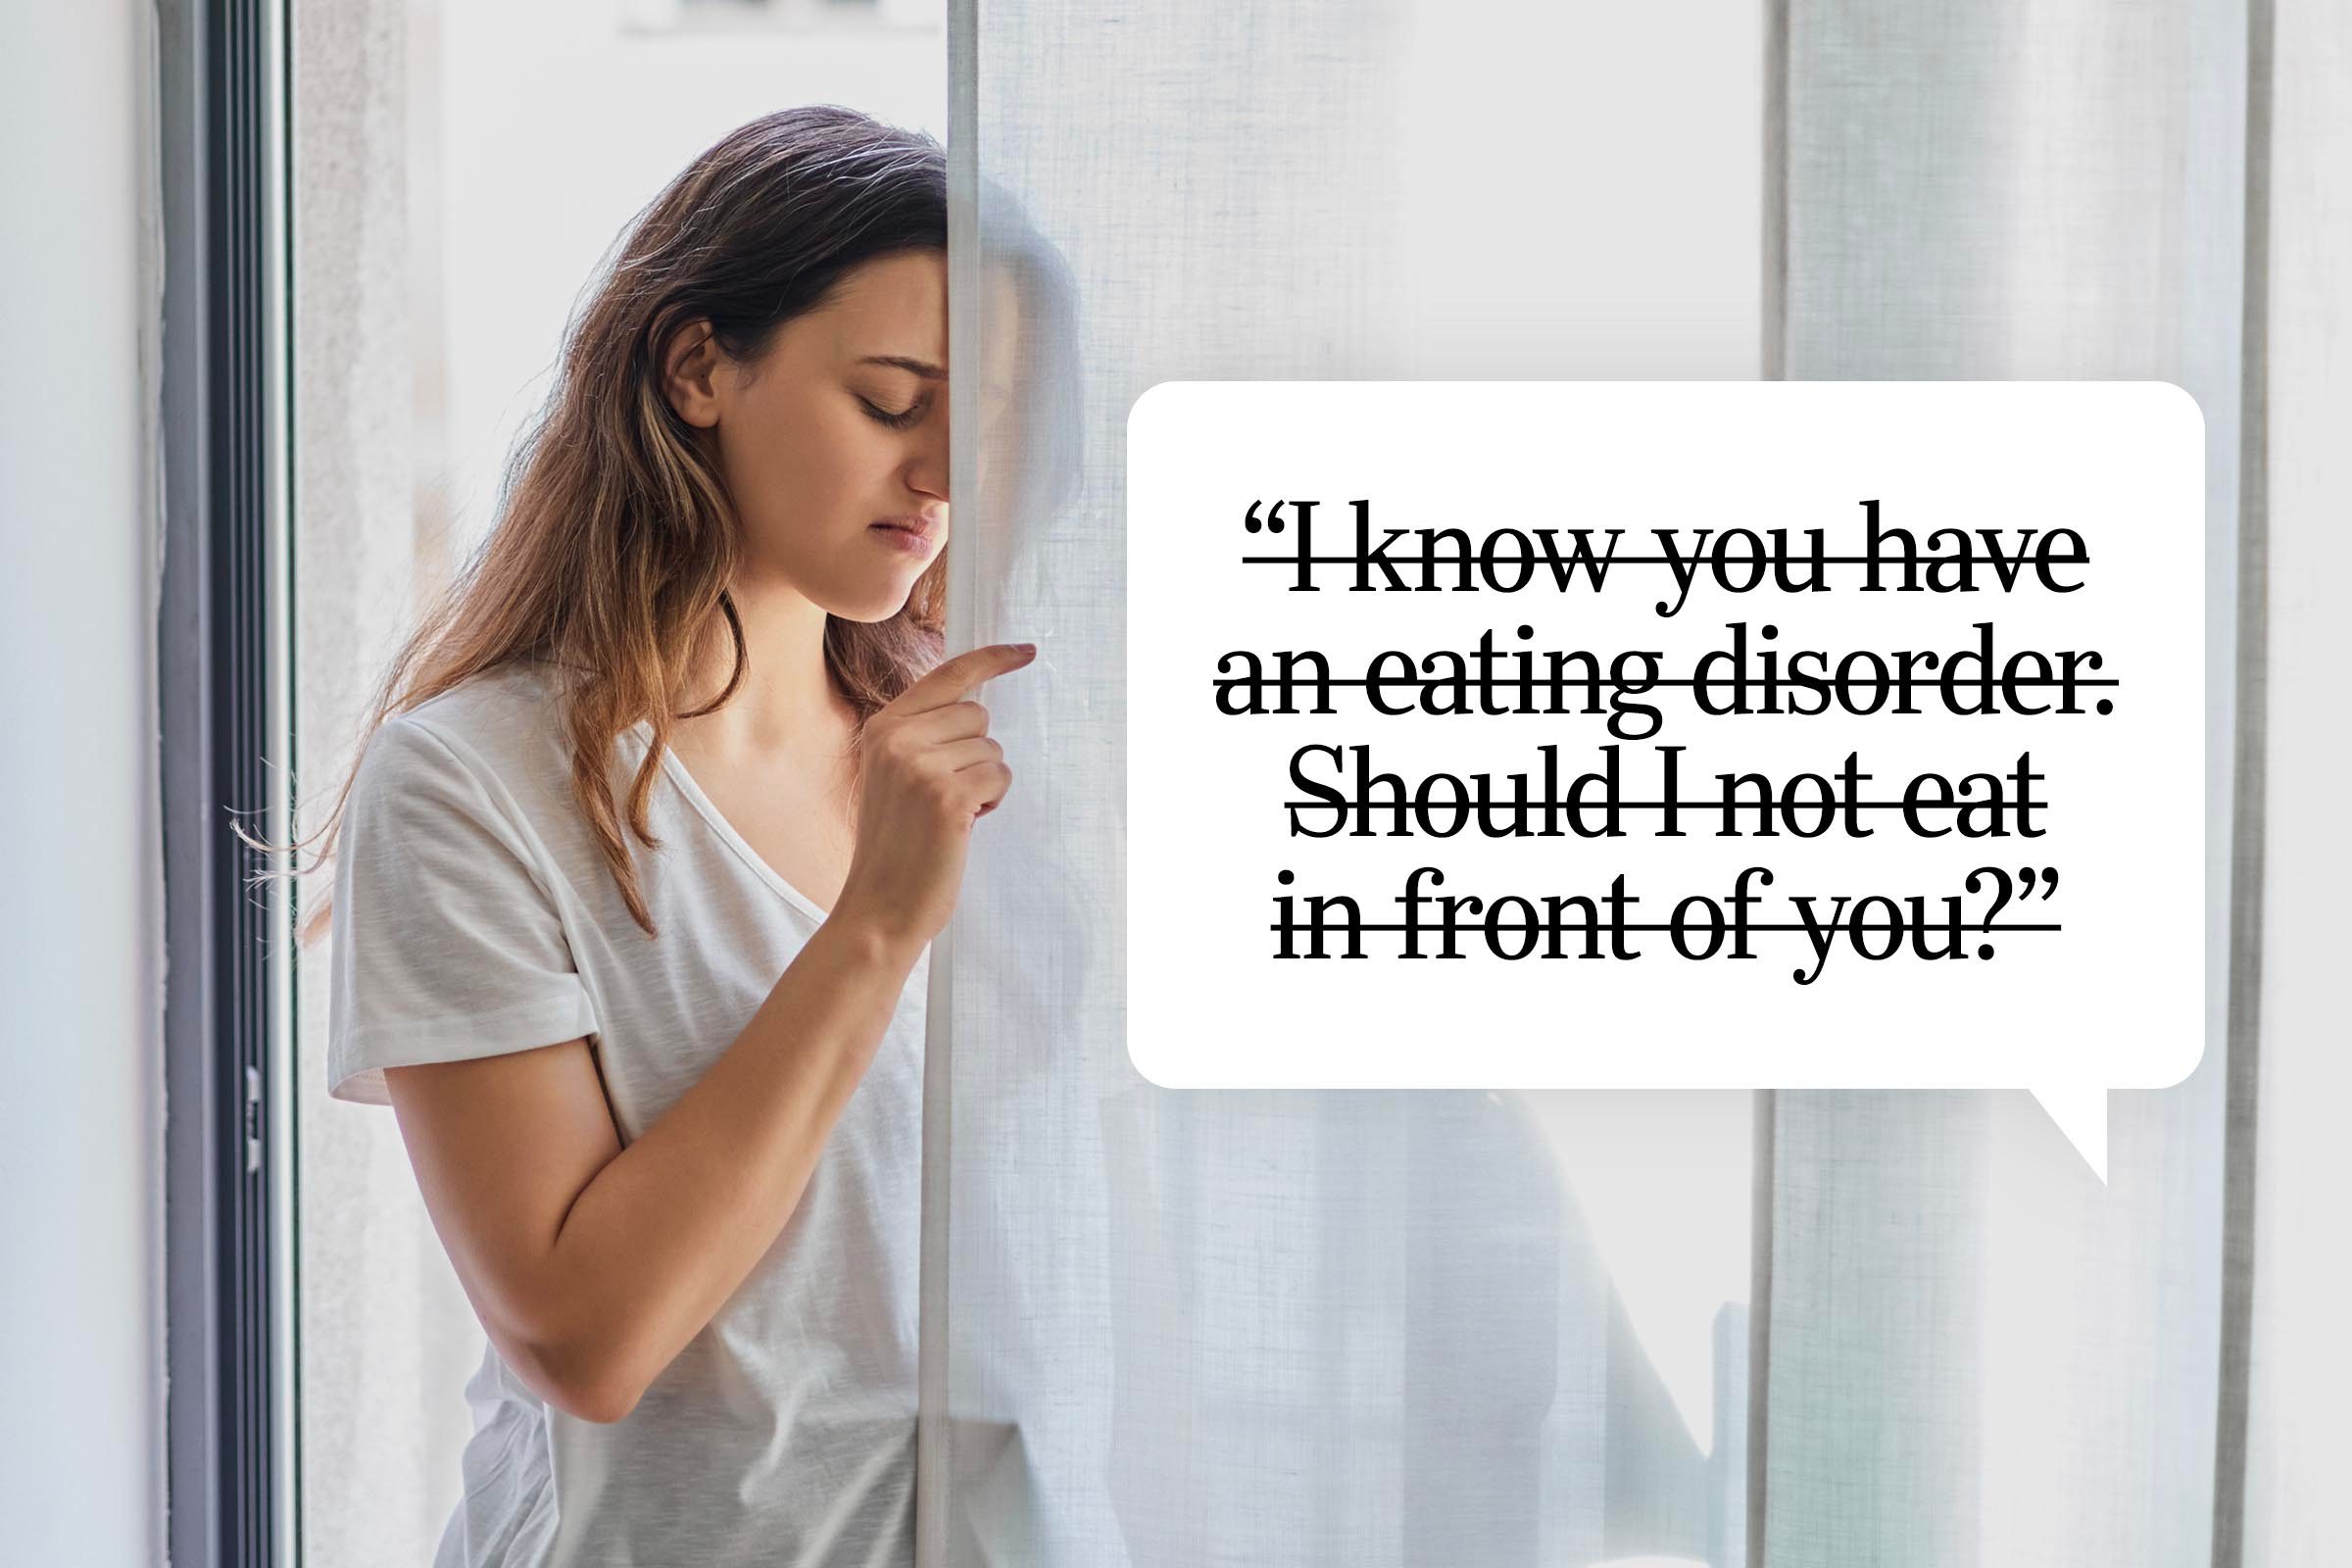 Speech bubble text: "I know you have an eating disorder. Should I not eat in front of you?"